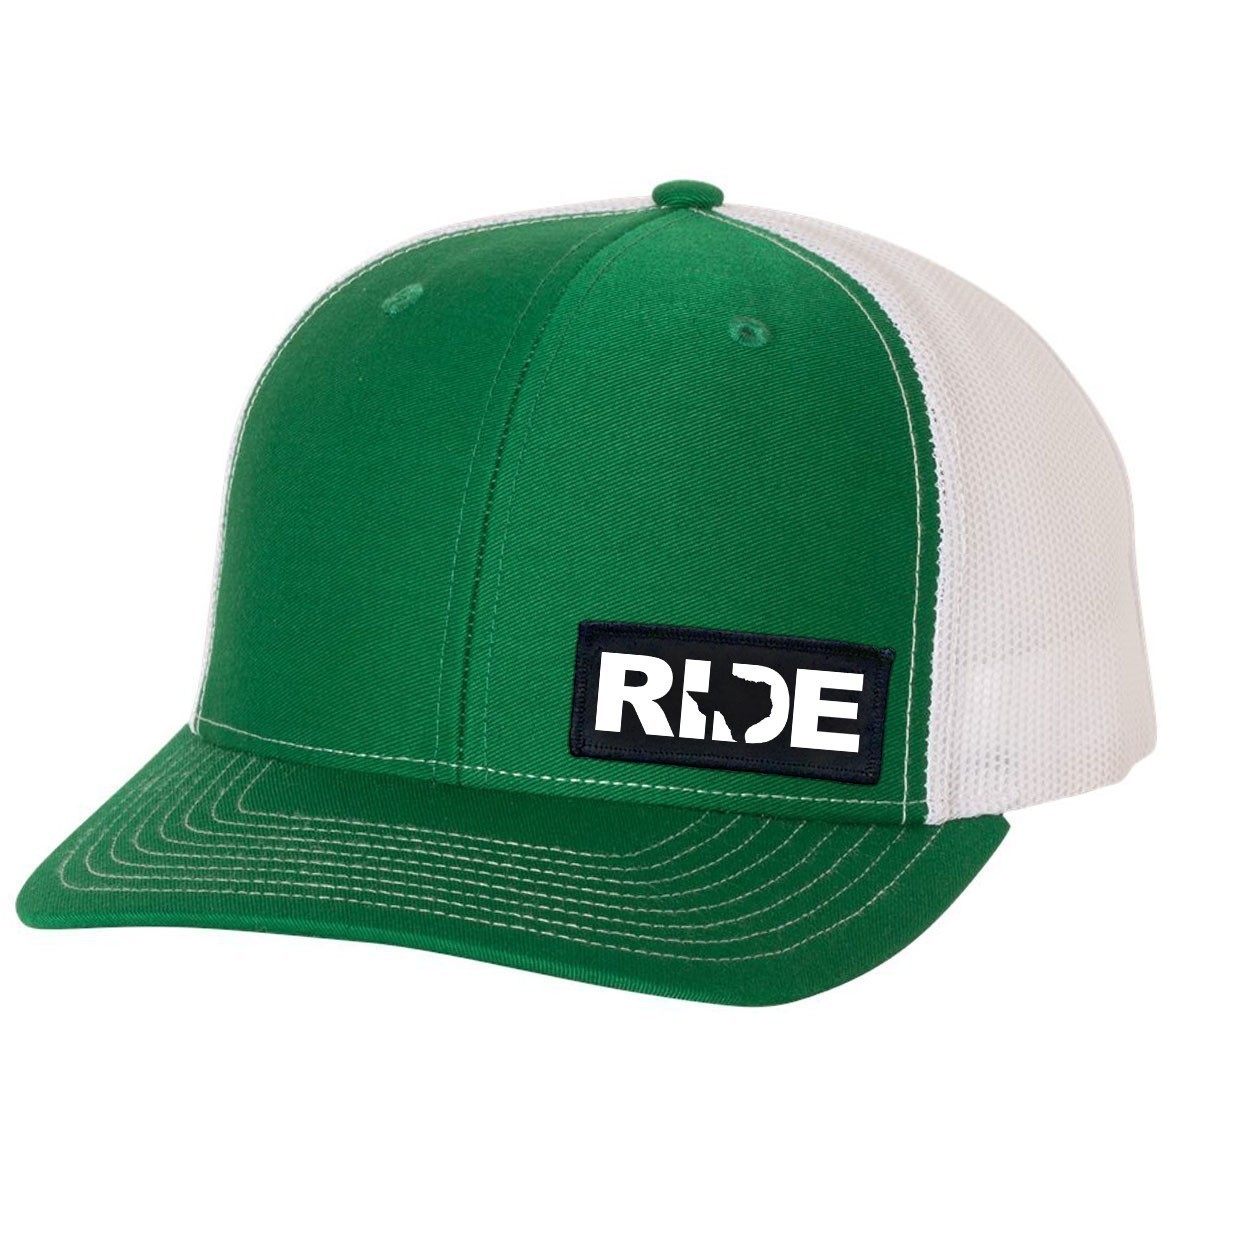 Ride Texas Night Out Woven Patch Snapback Trucker Hat Green/White (White Logo)